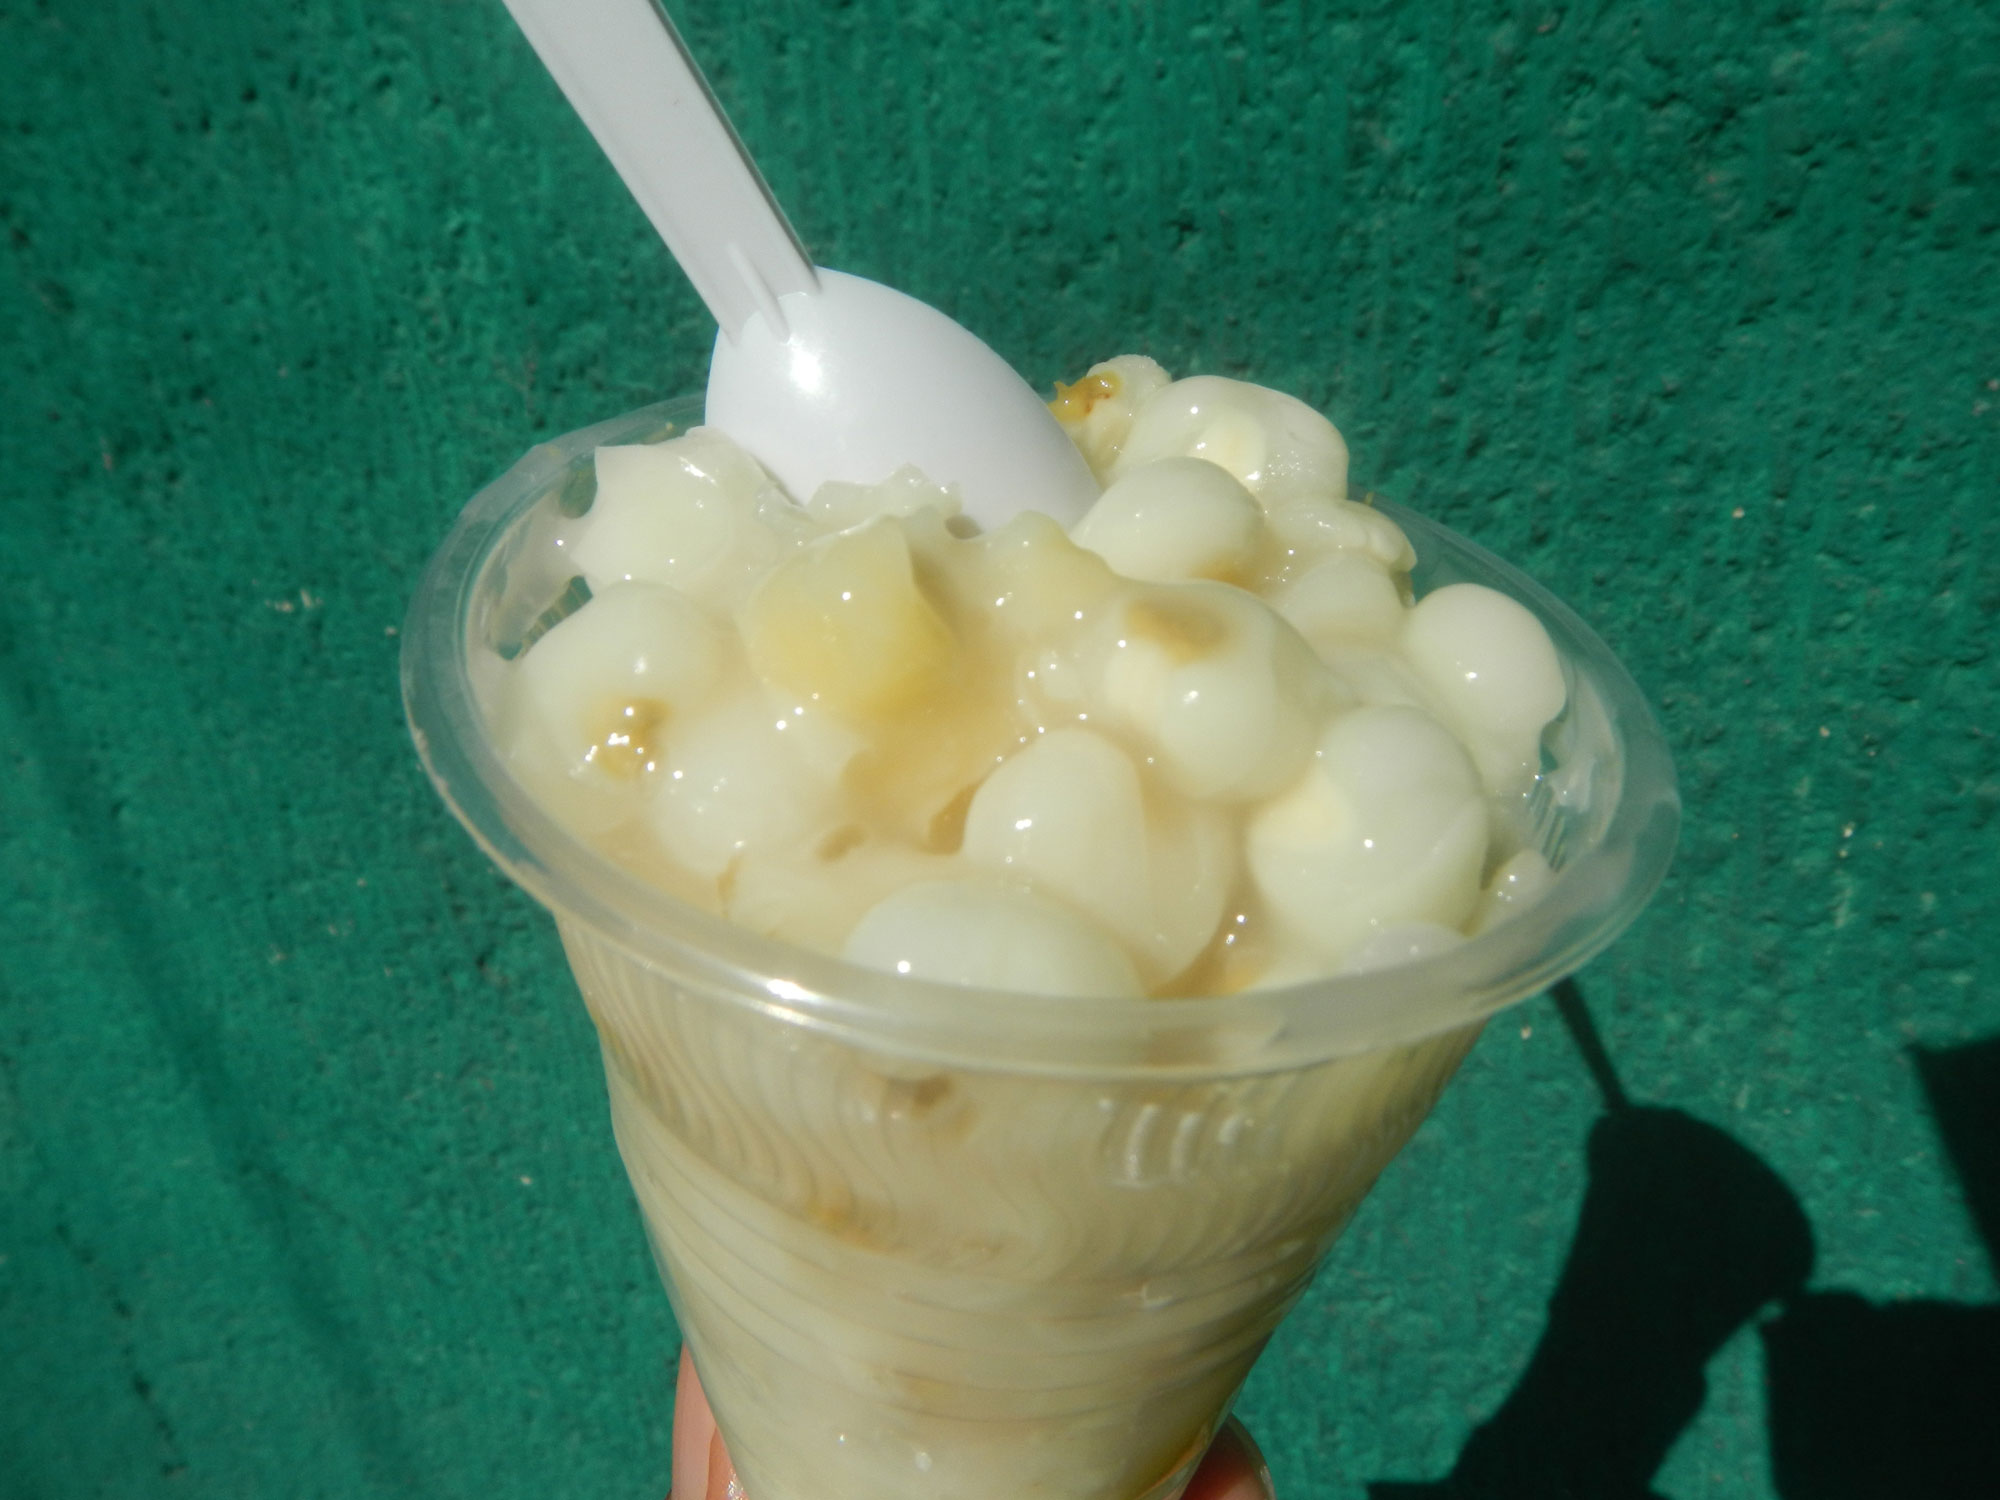 Photograph of binatog, a maize-based dessert from the Philippines. The photo shows a clear, plastic, conical cup filled with white boiled maize kernels with a white plastic spoon standing upright in the kernels. 